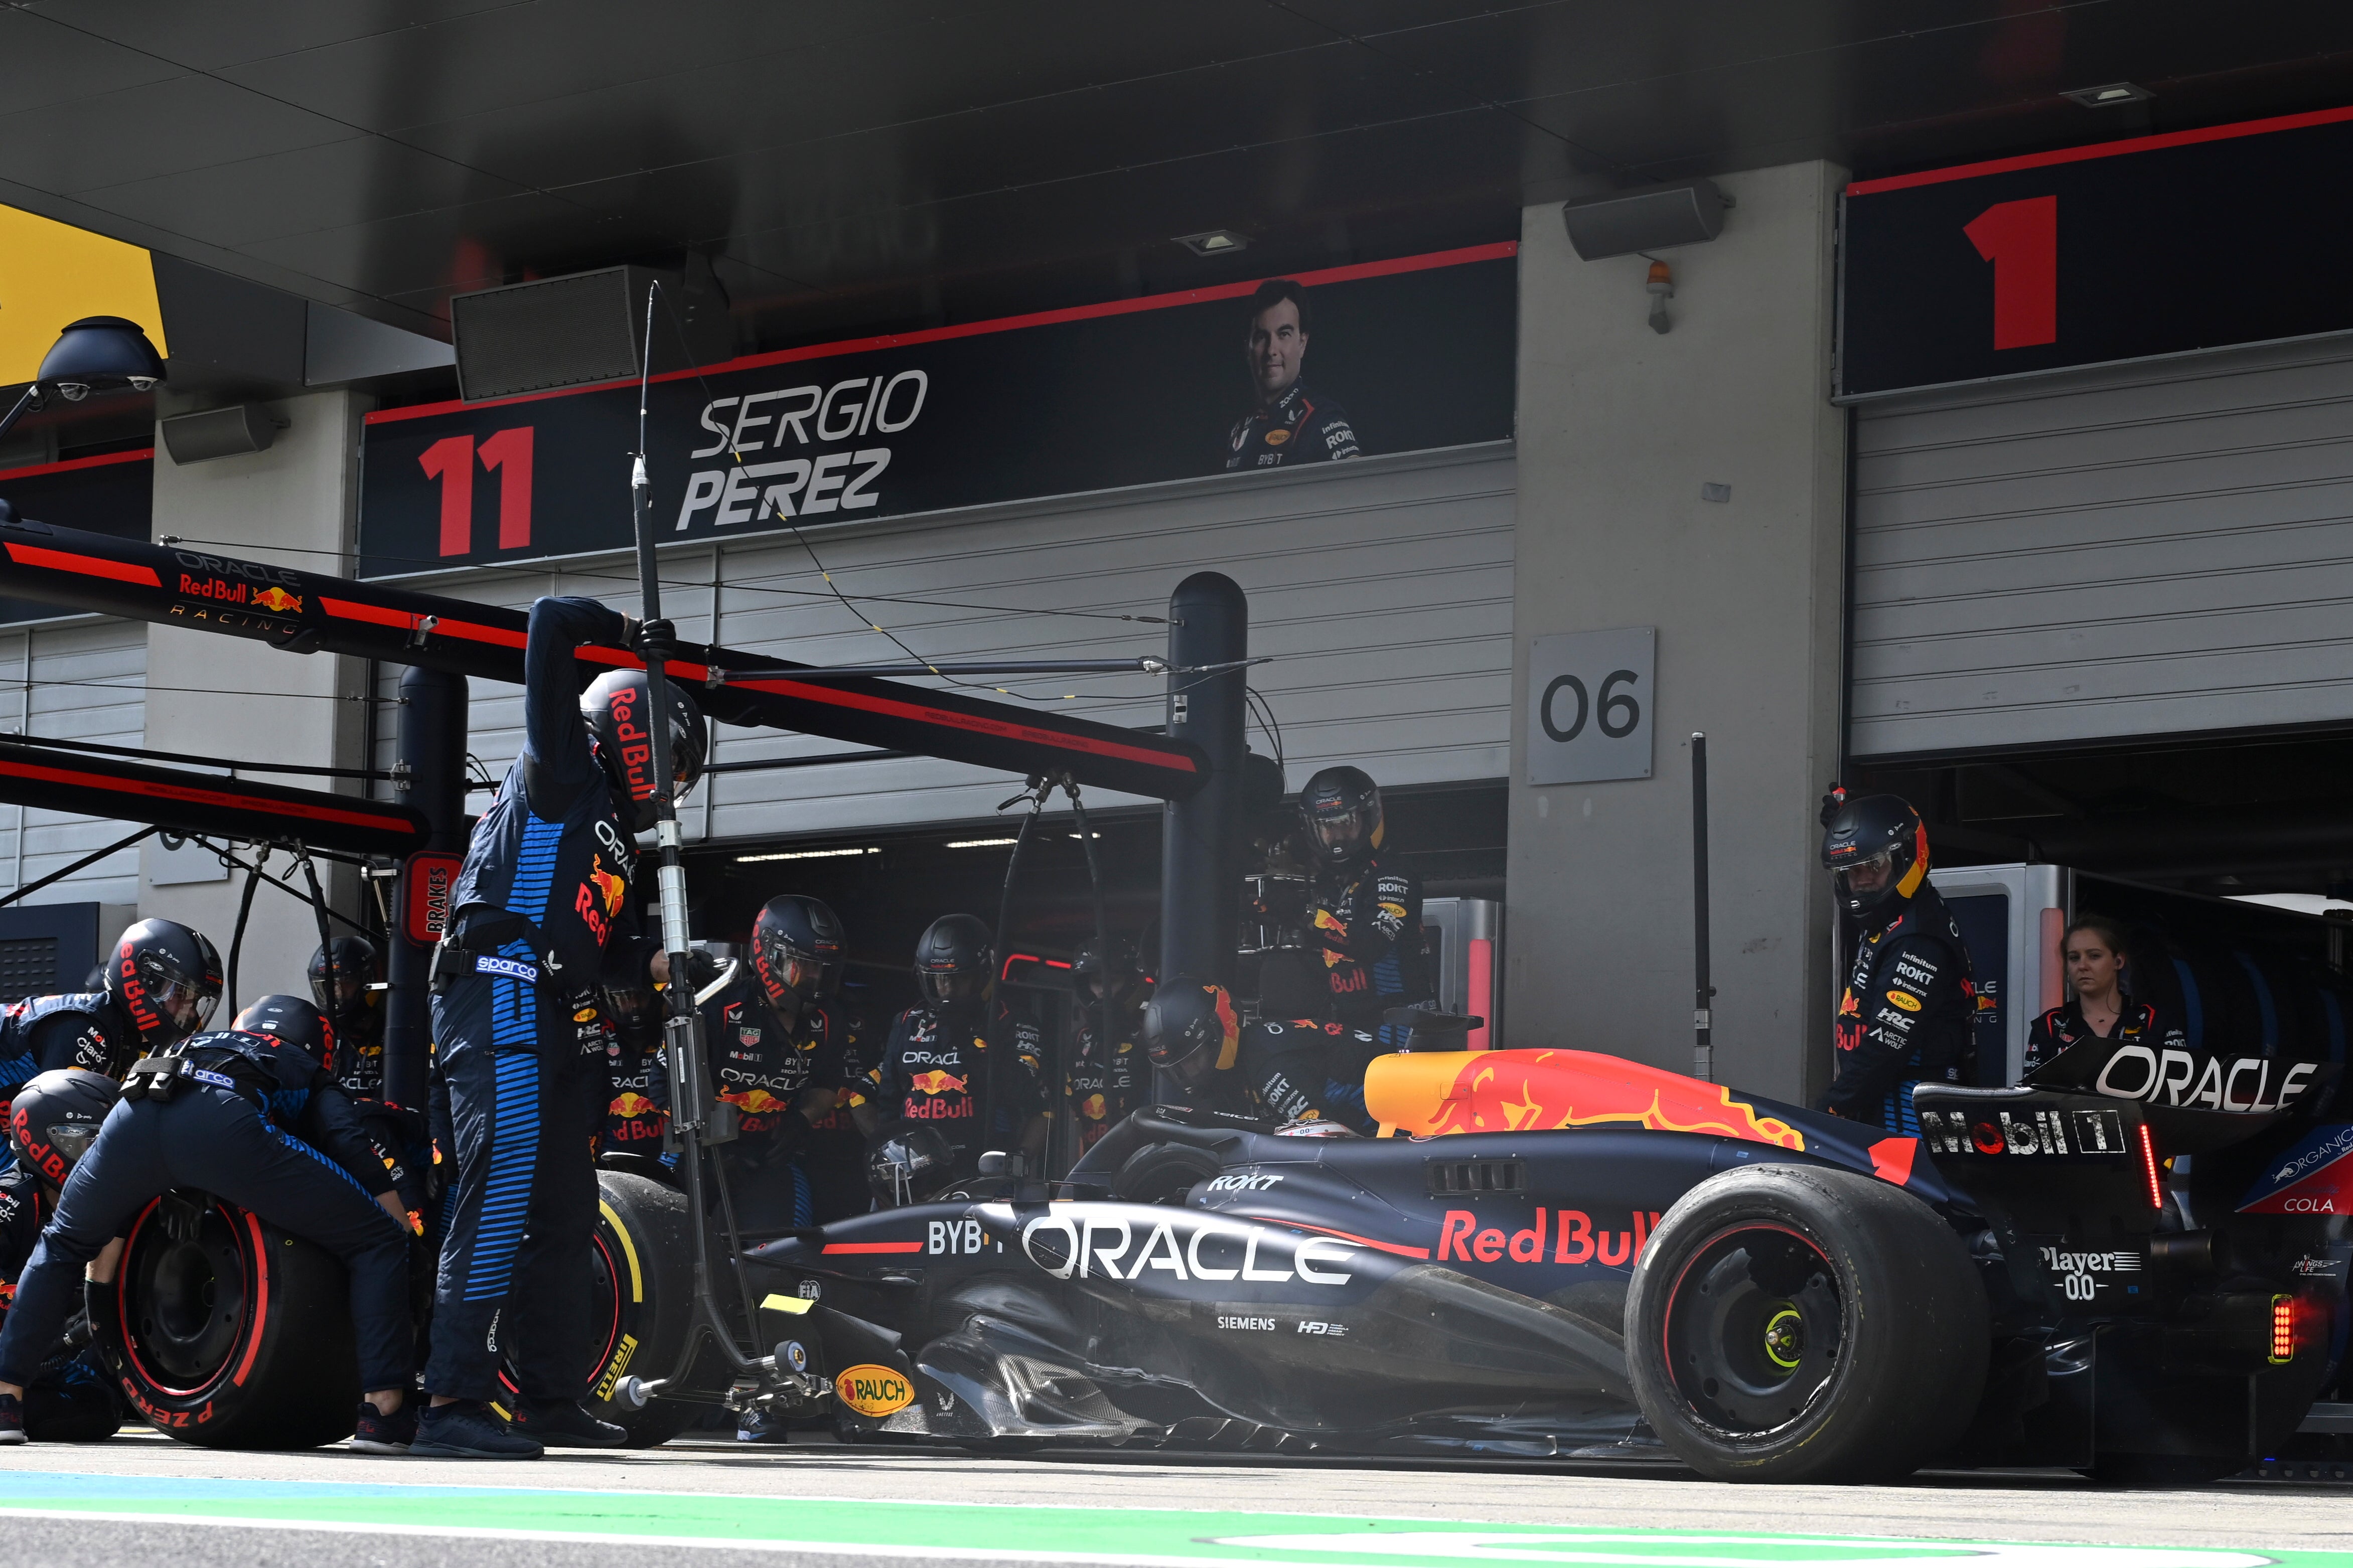 A slow Max Verstappen pit stop gave Norris an opening back into the race for the lead